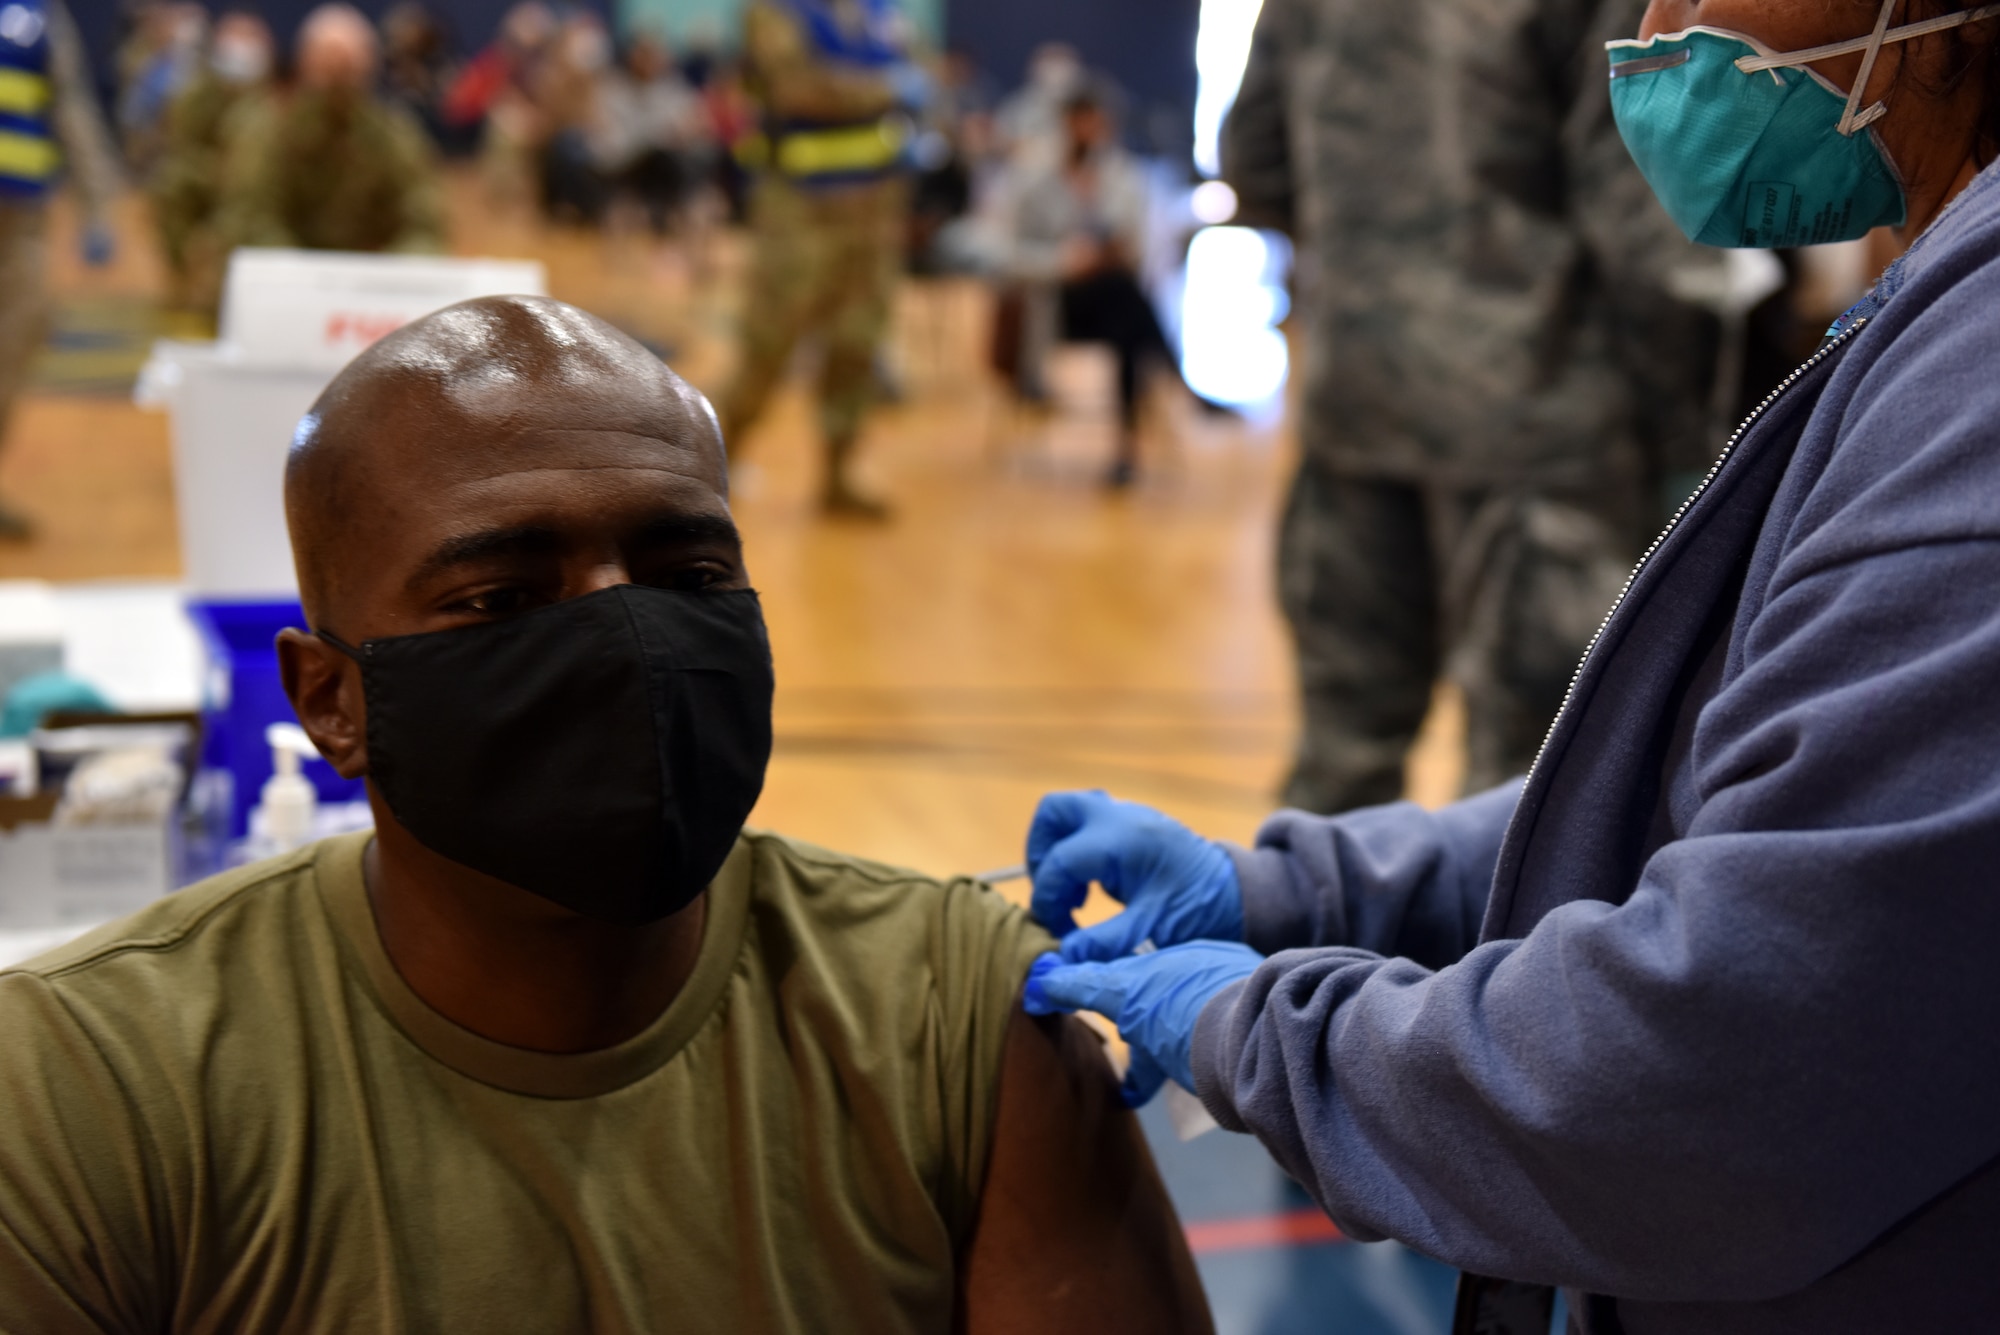 A medical technician with the 17th Medical Group, applies a band aide to U.S. Air Force Col. James Finlayson, 17th Training Wing vice commander, after administering the COVID-19 vaccine at the Mathis Fitness Center on Goodfellow Air Force Base, Texas, Jan. 22,2021. On Jan. 20, Team Goodfellow vaccinated its frontline and mission essential positions and those who are considered high risk, first, in accordance with the Department of the Air Forces distribution plan. (U.S. Air Force photo by Staff Sgt. Seraiah Wolf)